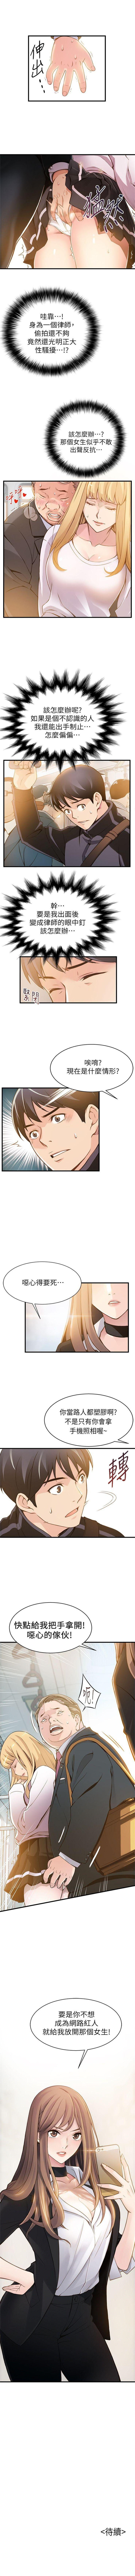 Wanking 弱點 1-101 官方中文（連載中） Chastity - Page 8